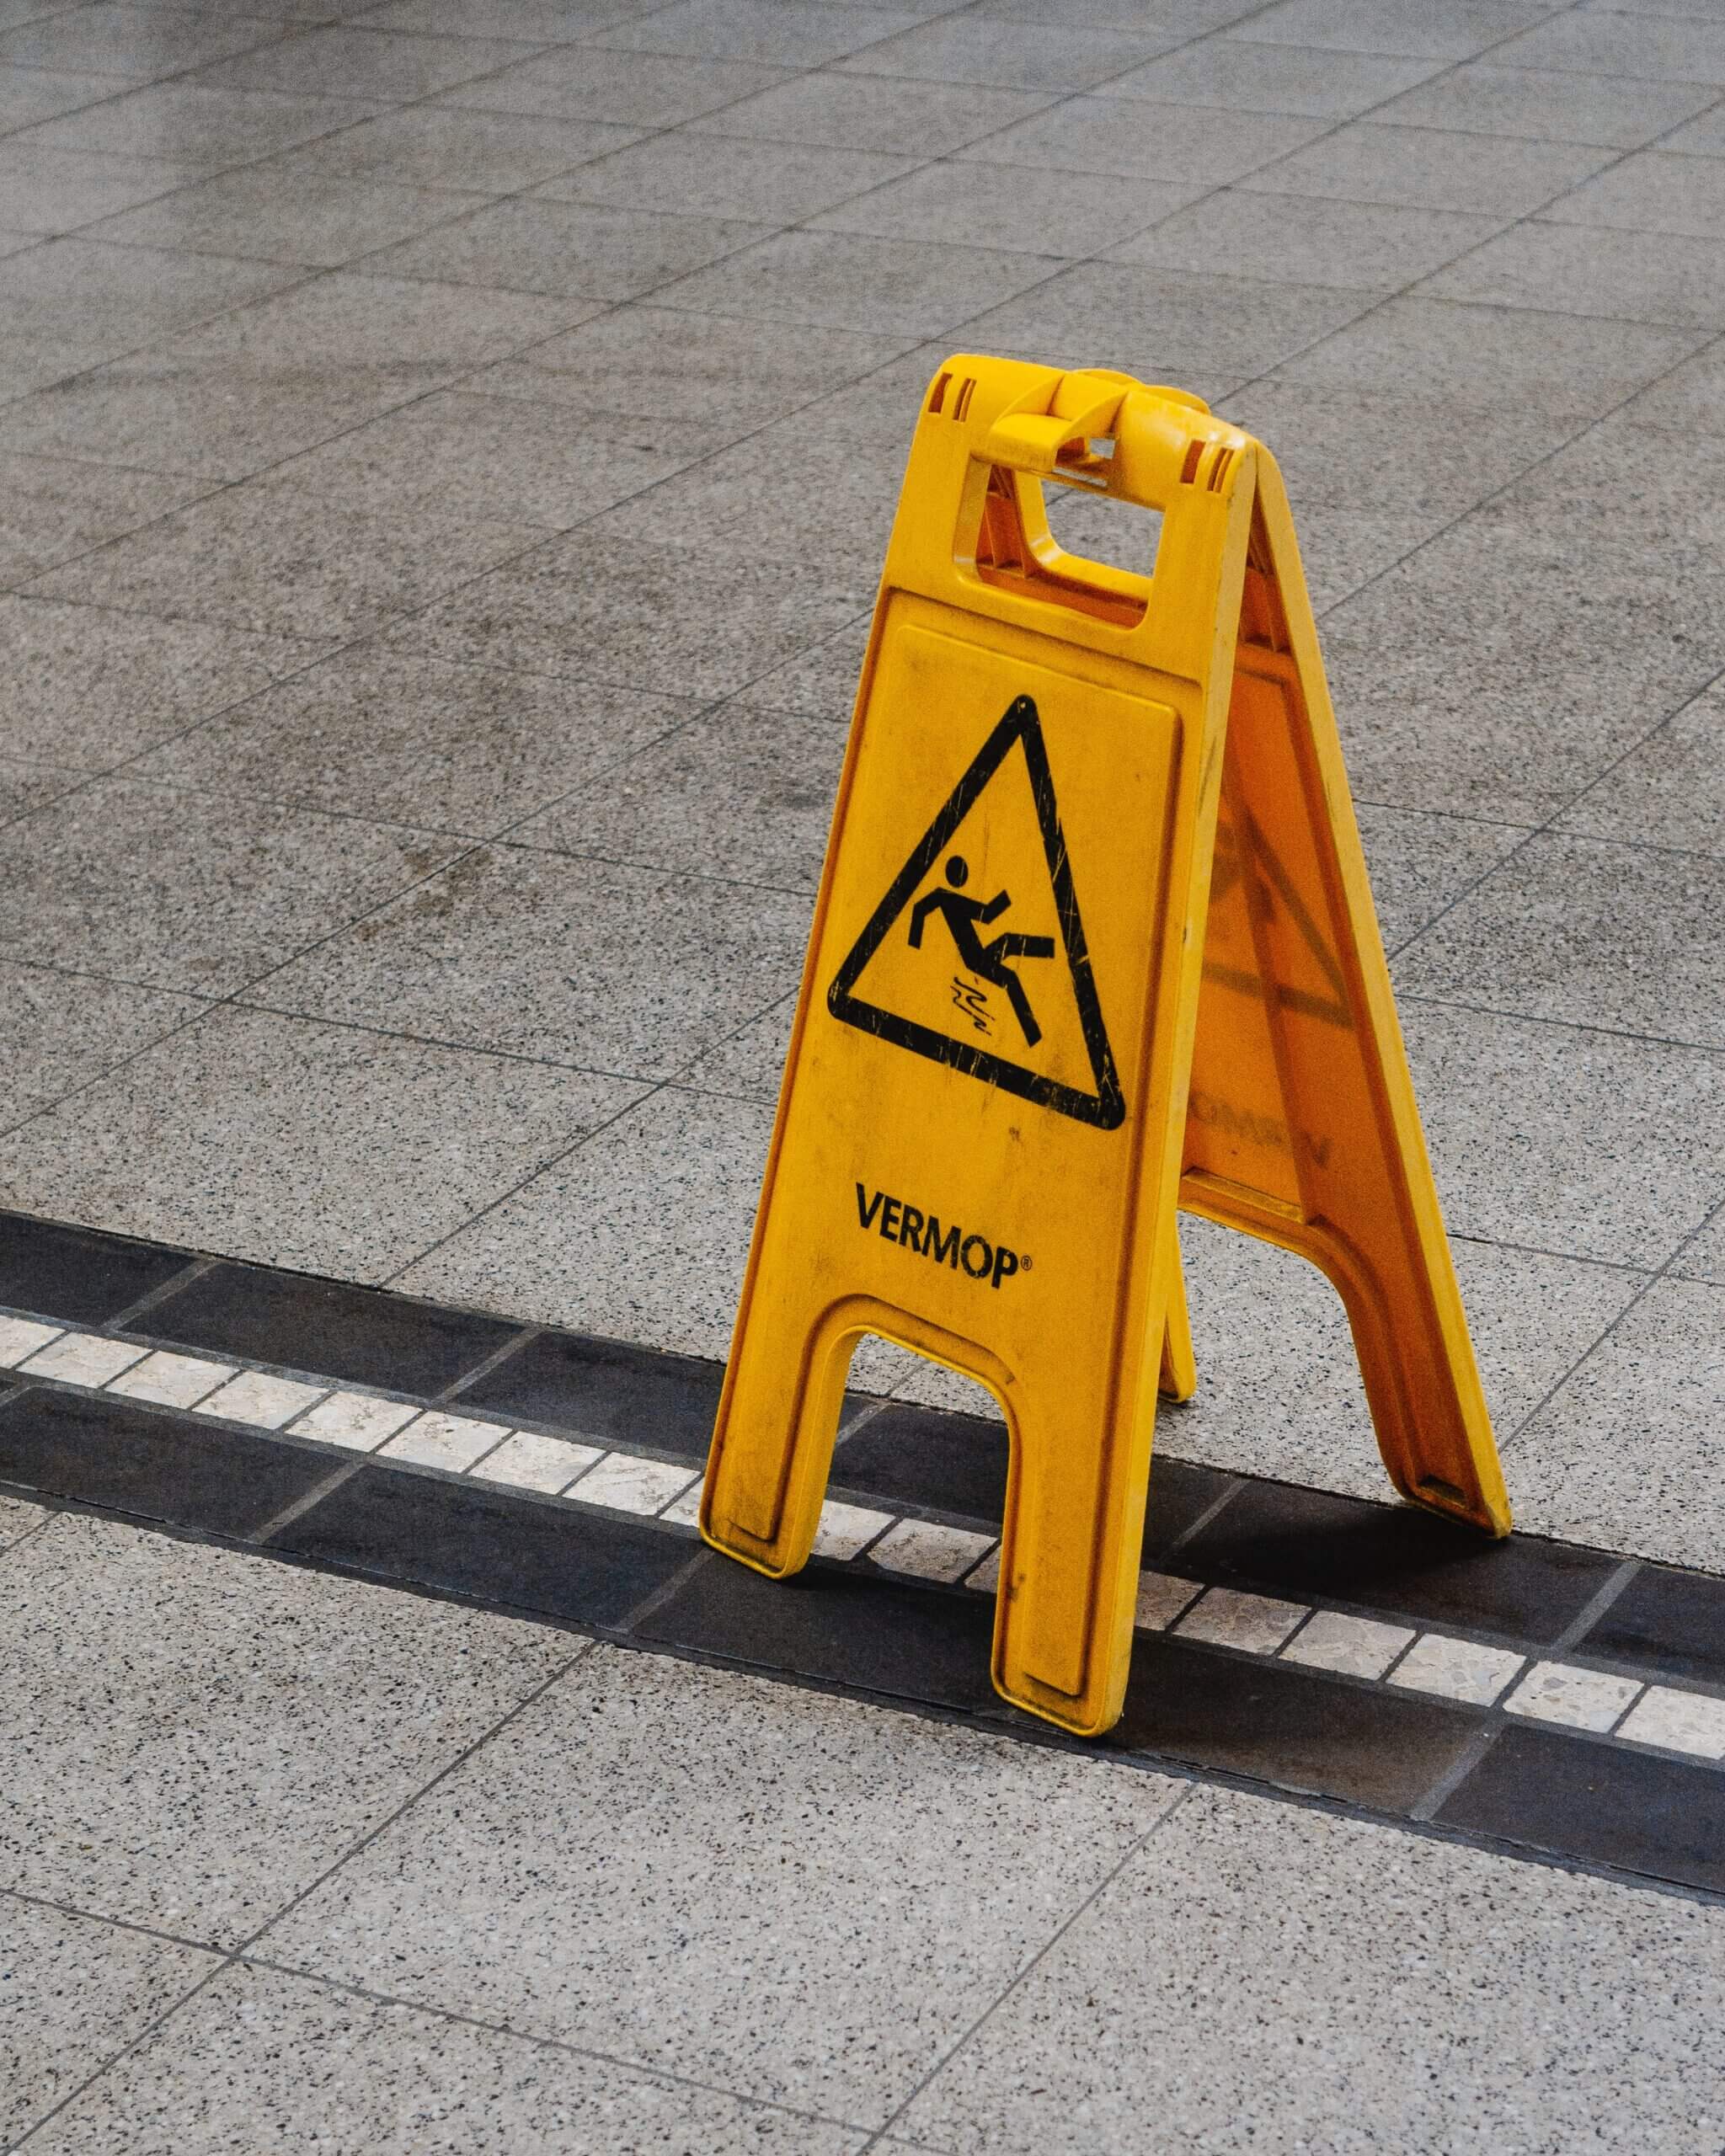 Maryland Slip and Fall Lawyer